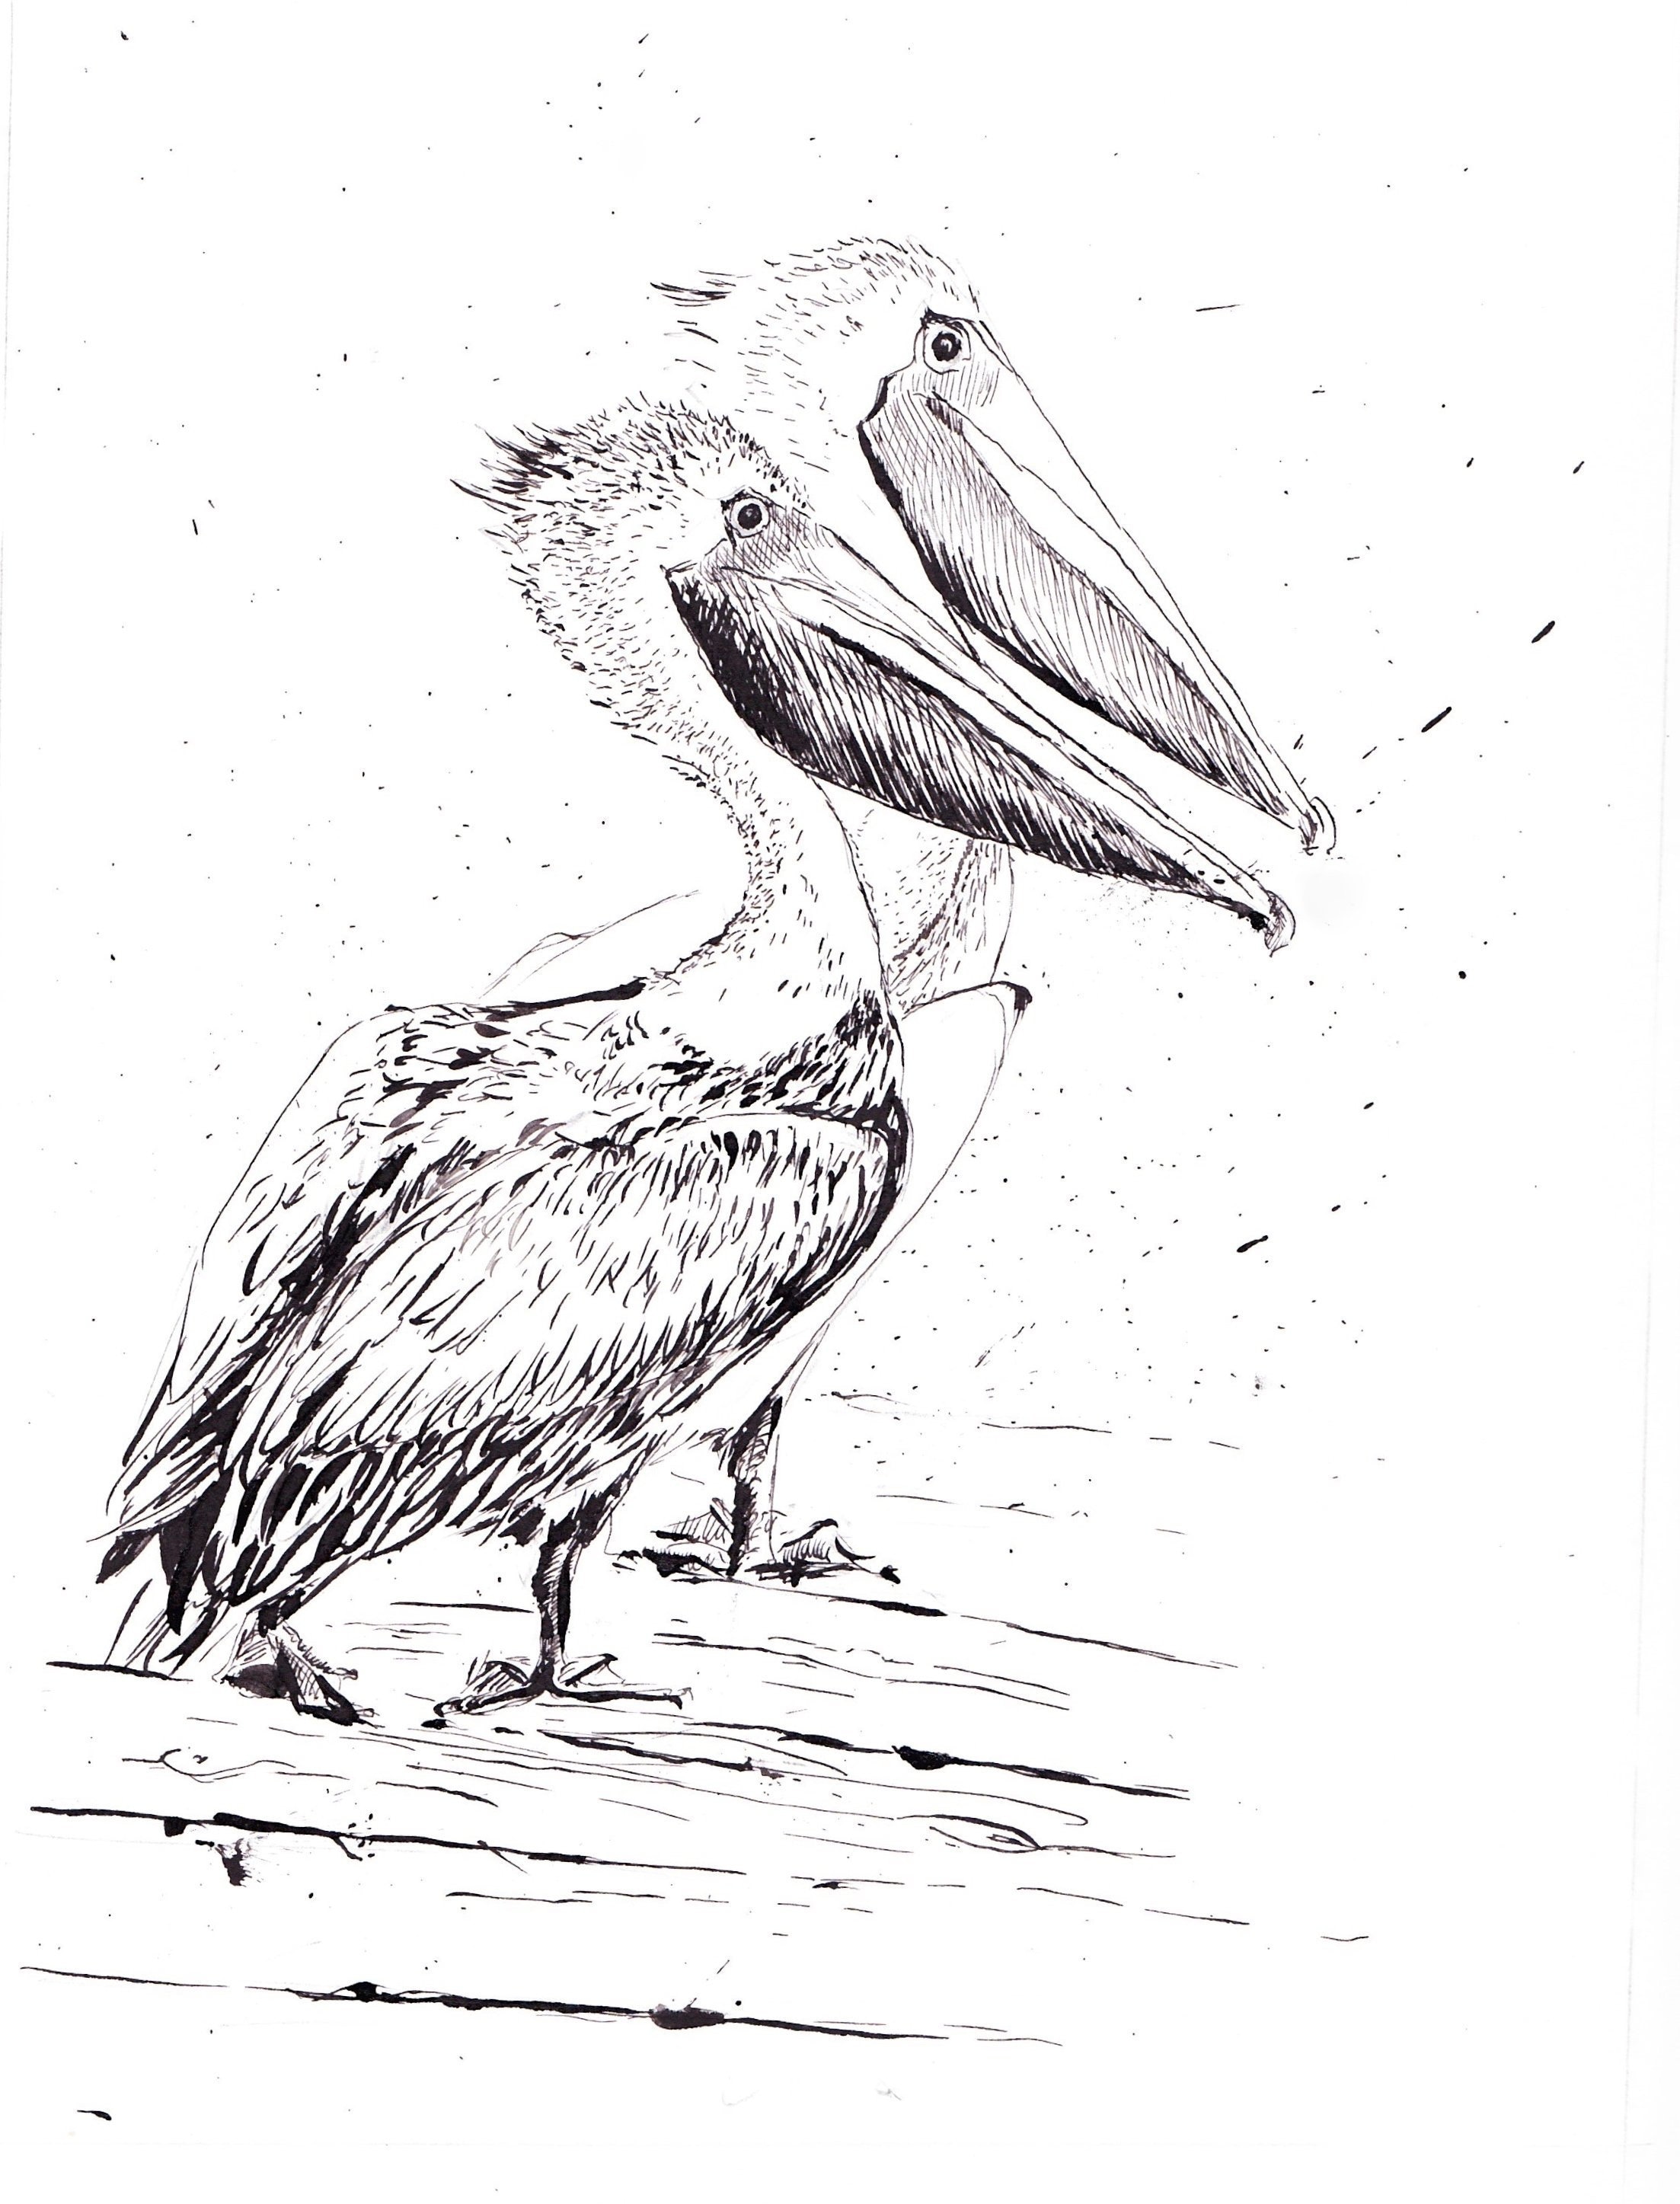 How to draw a Pelican  Birds  Sketchok easy drawing guides